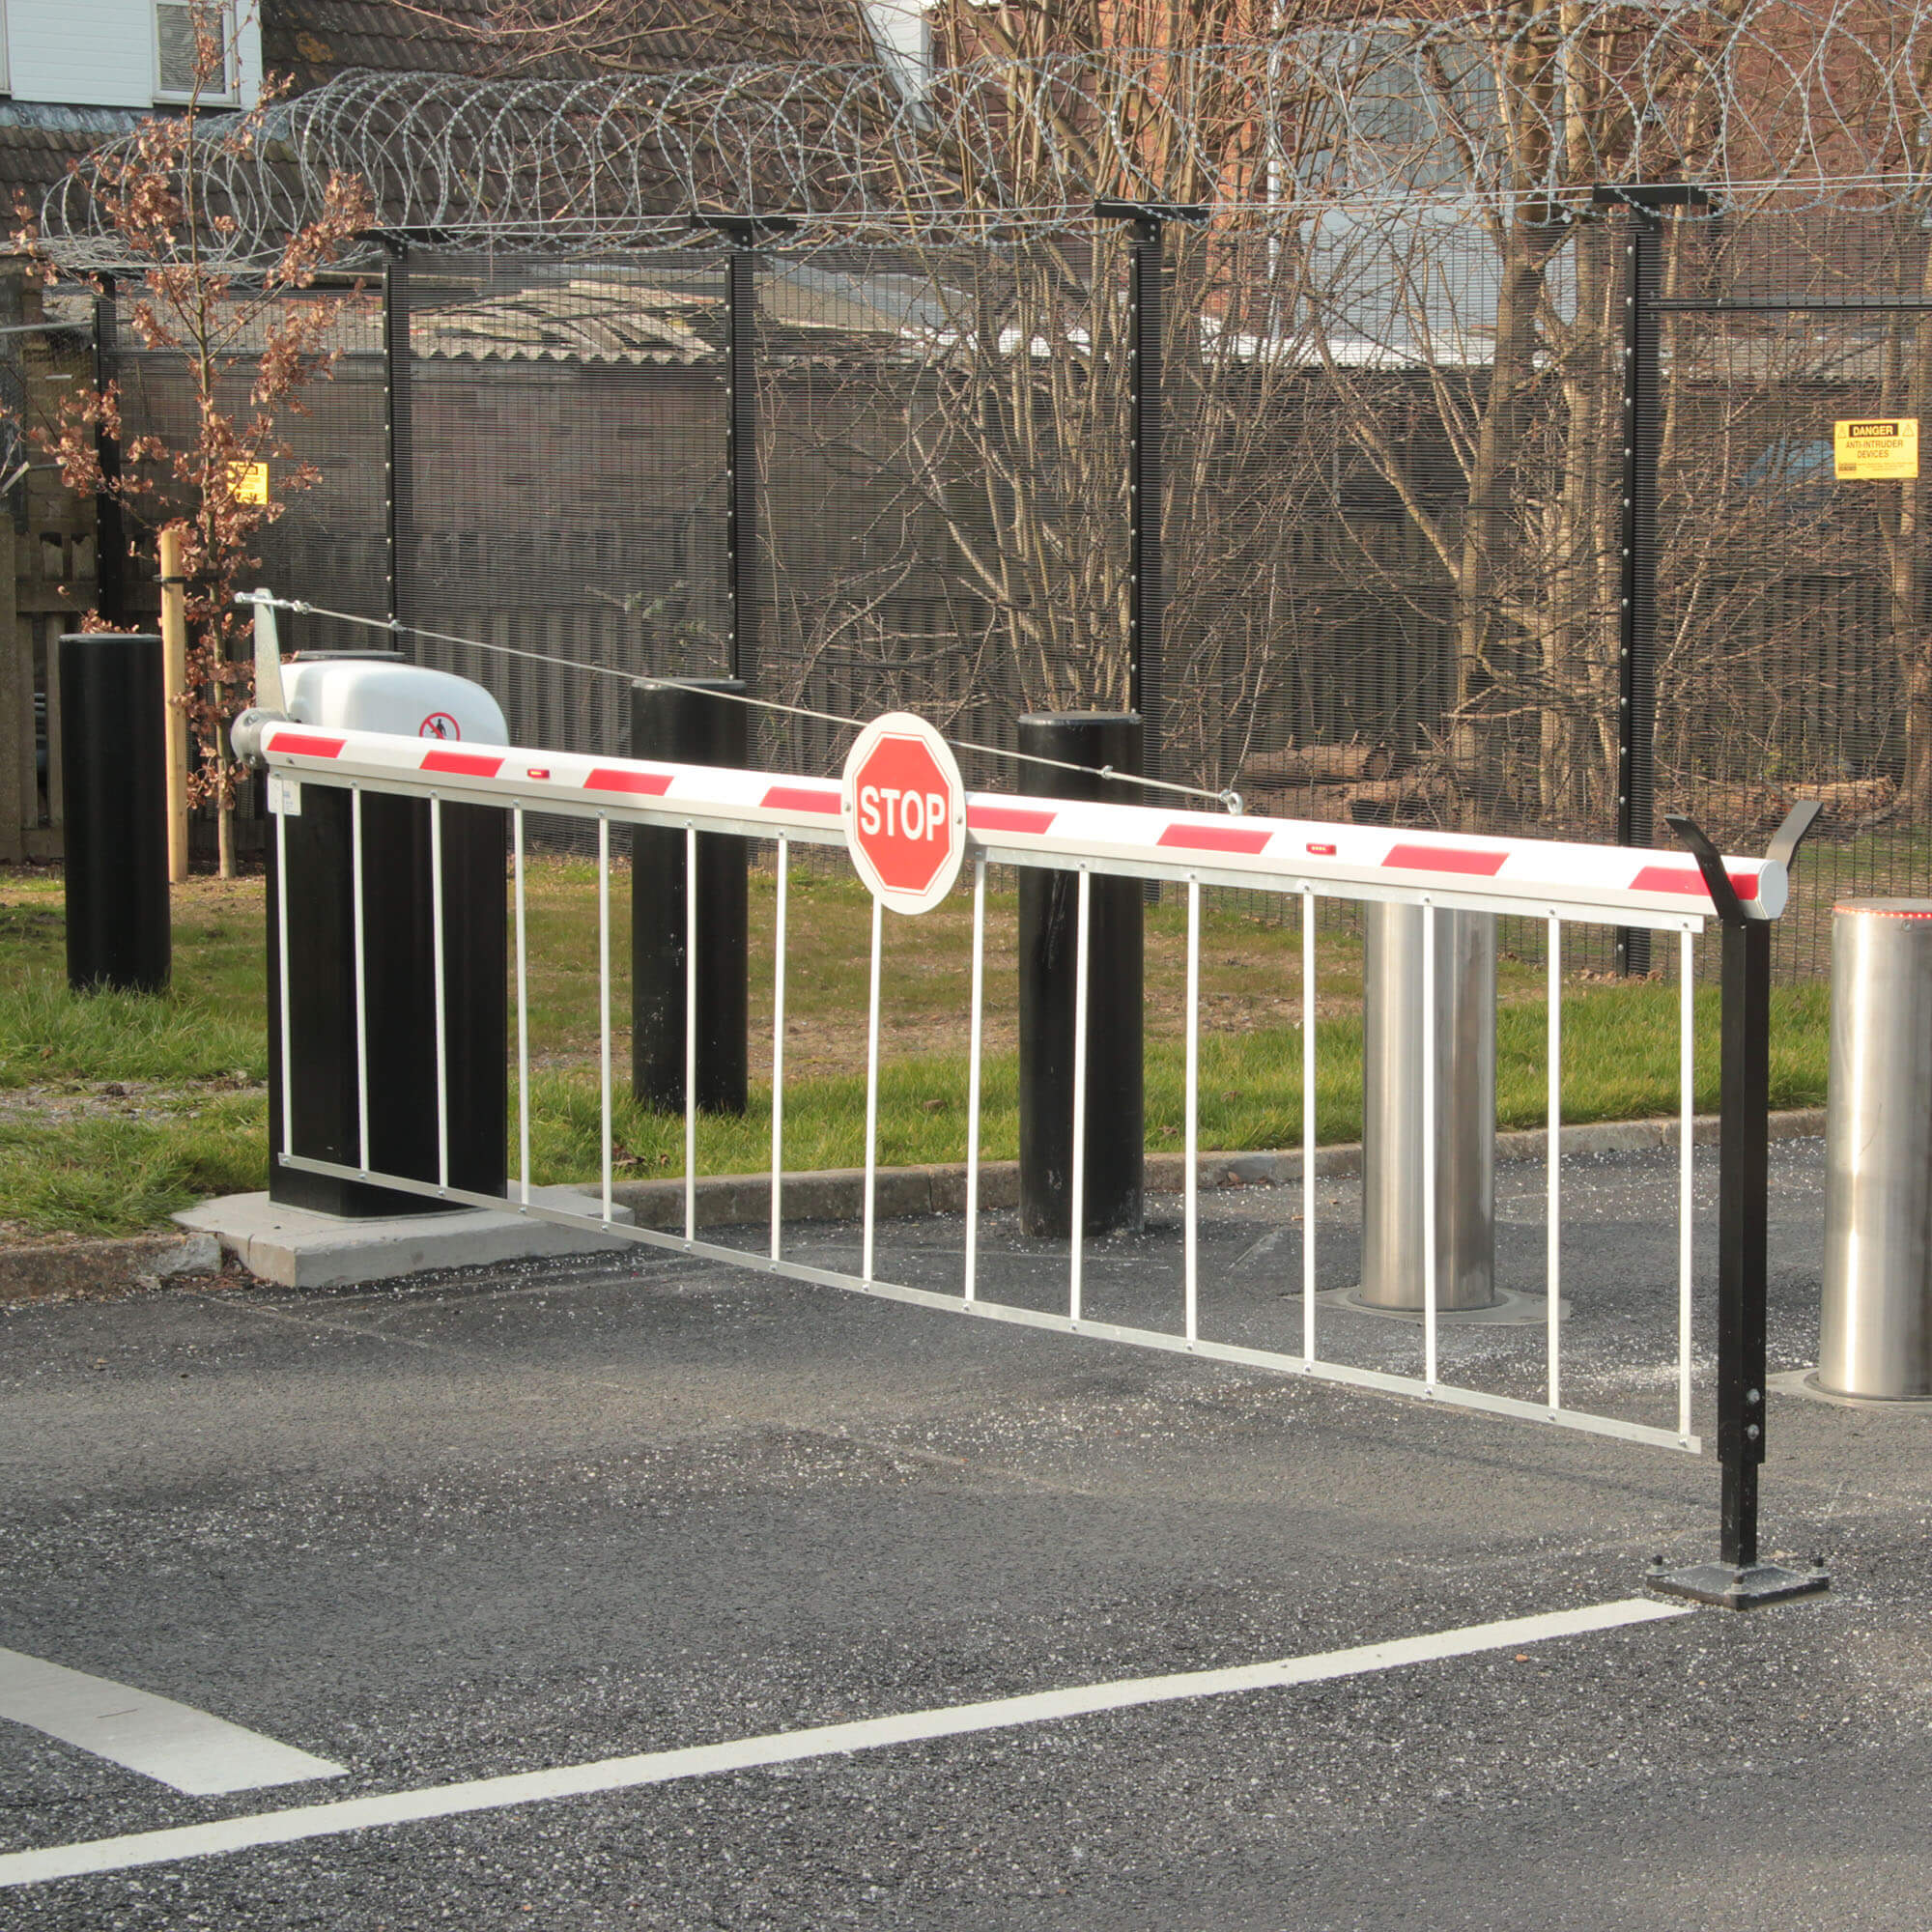 Parking control barriers